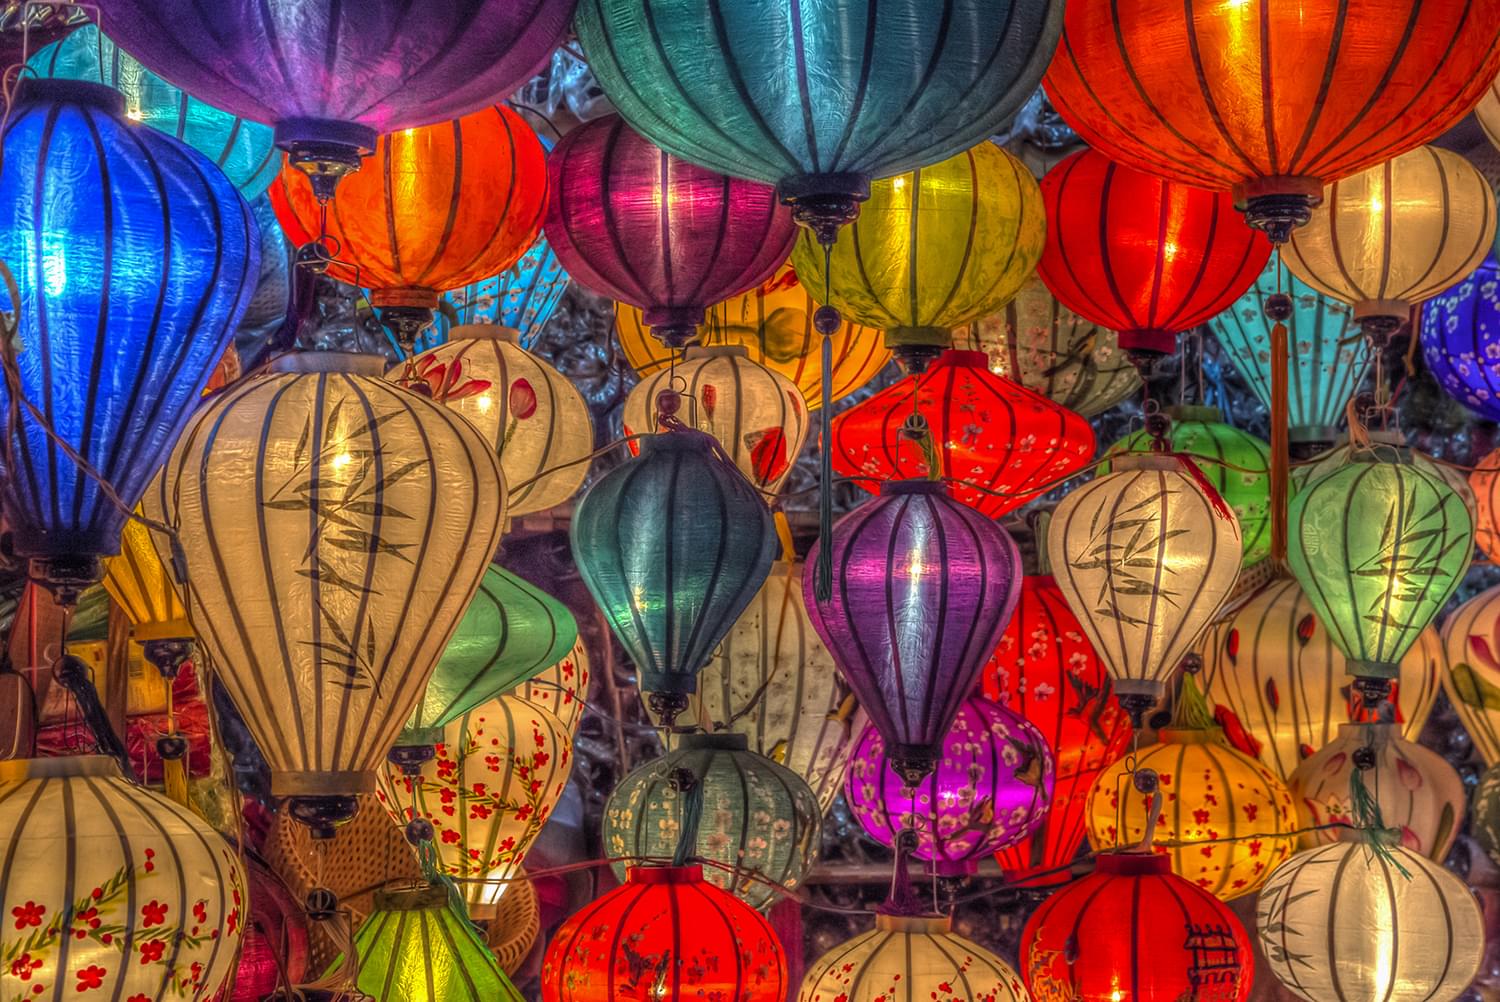 Lanterns In Hoi An City Floating Lights 1000 Piece Jigsaw Puzzle